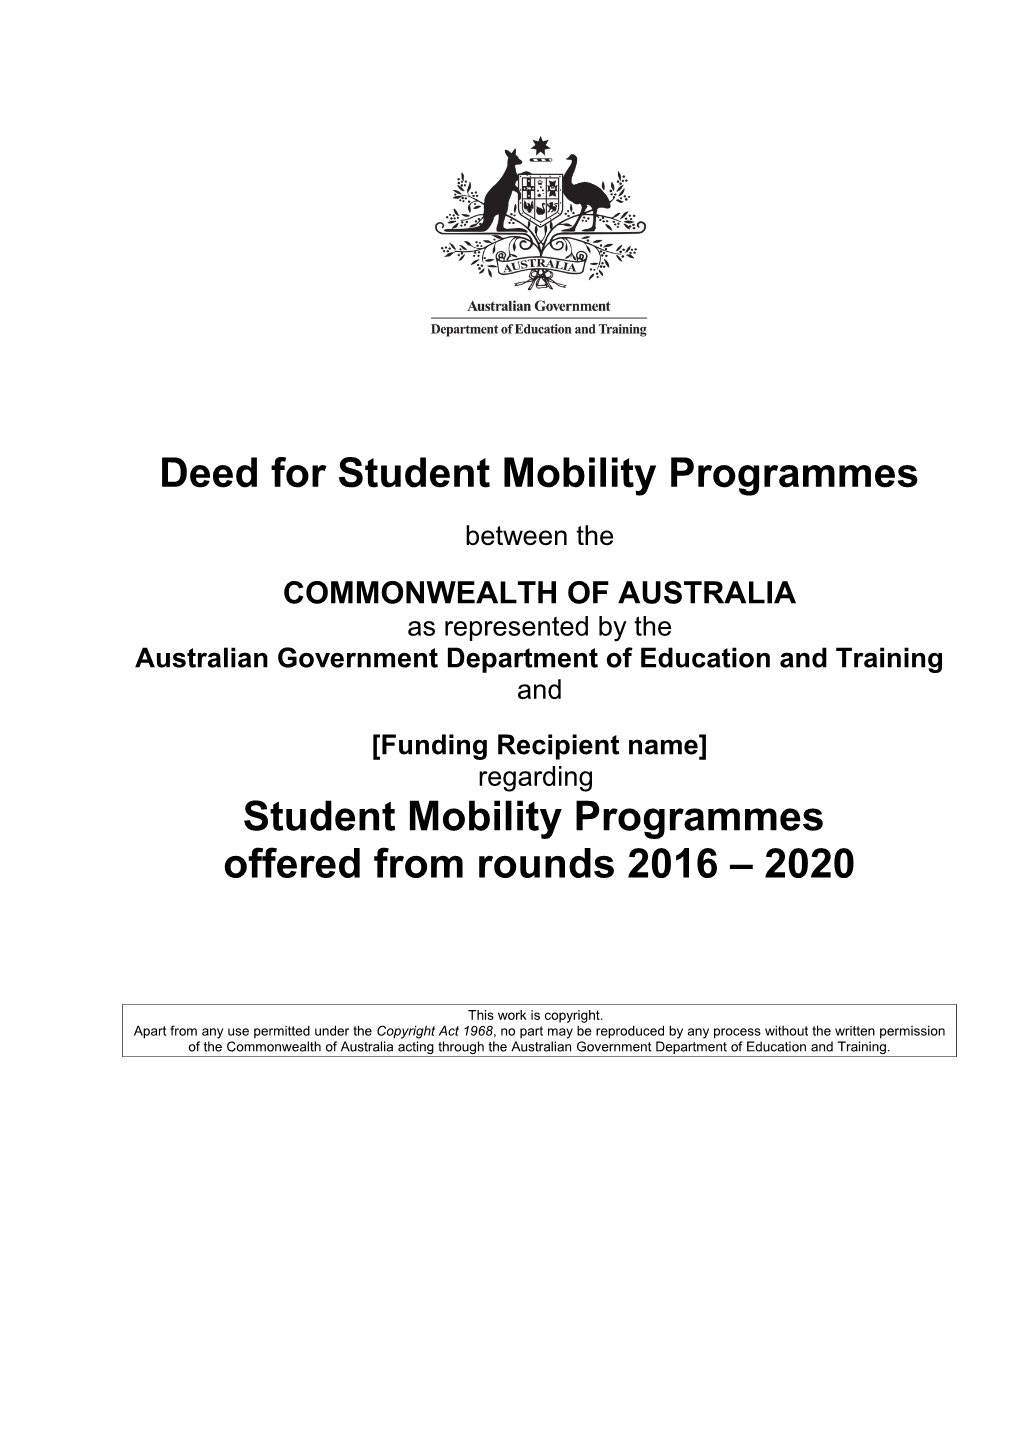 Deed for Student Mobility Programmes